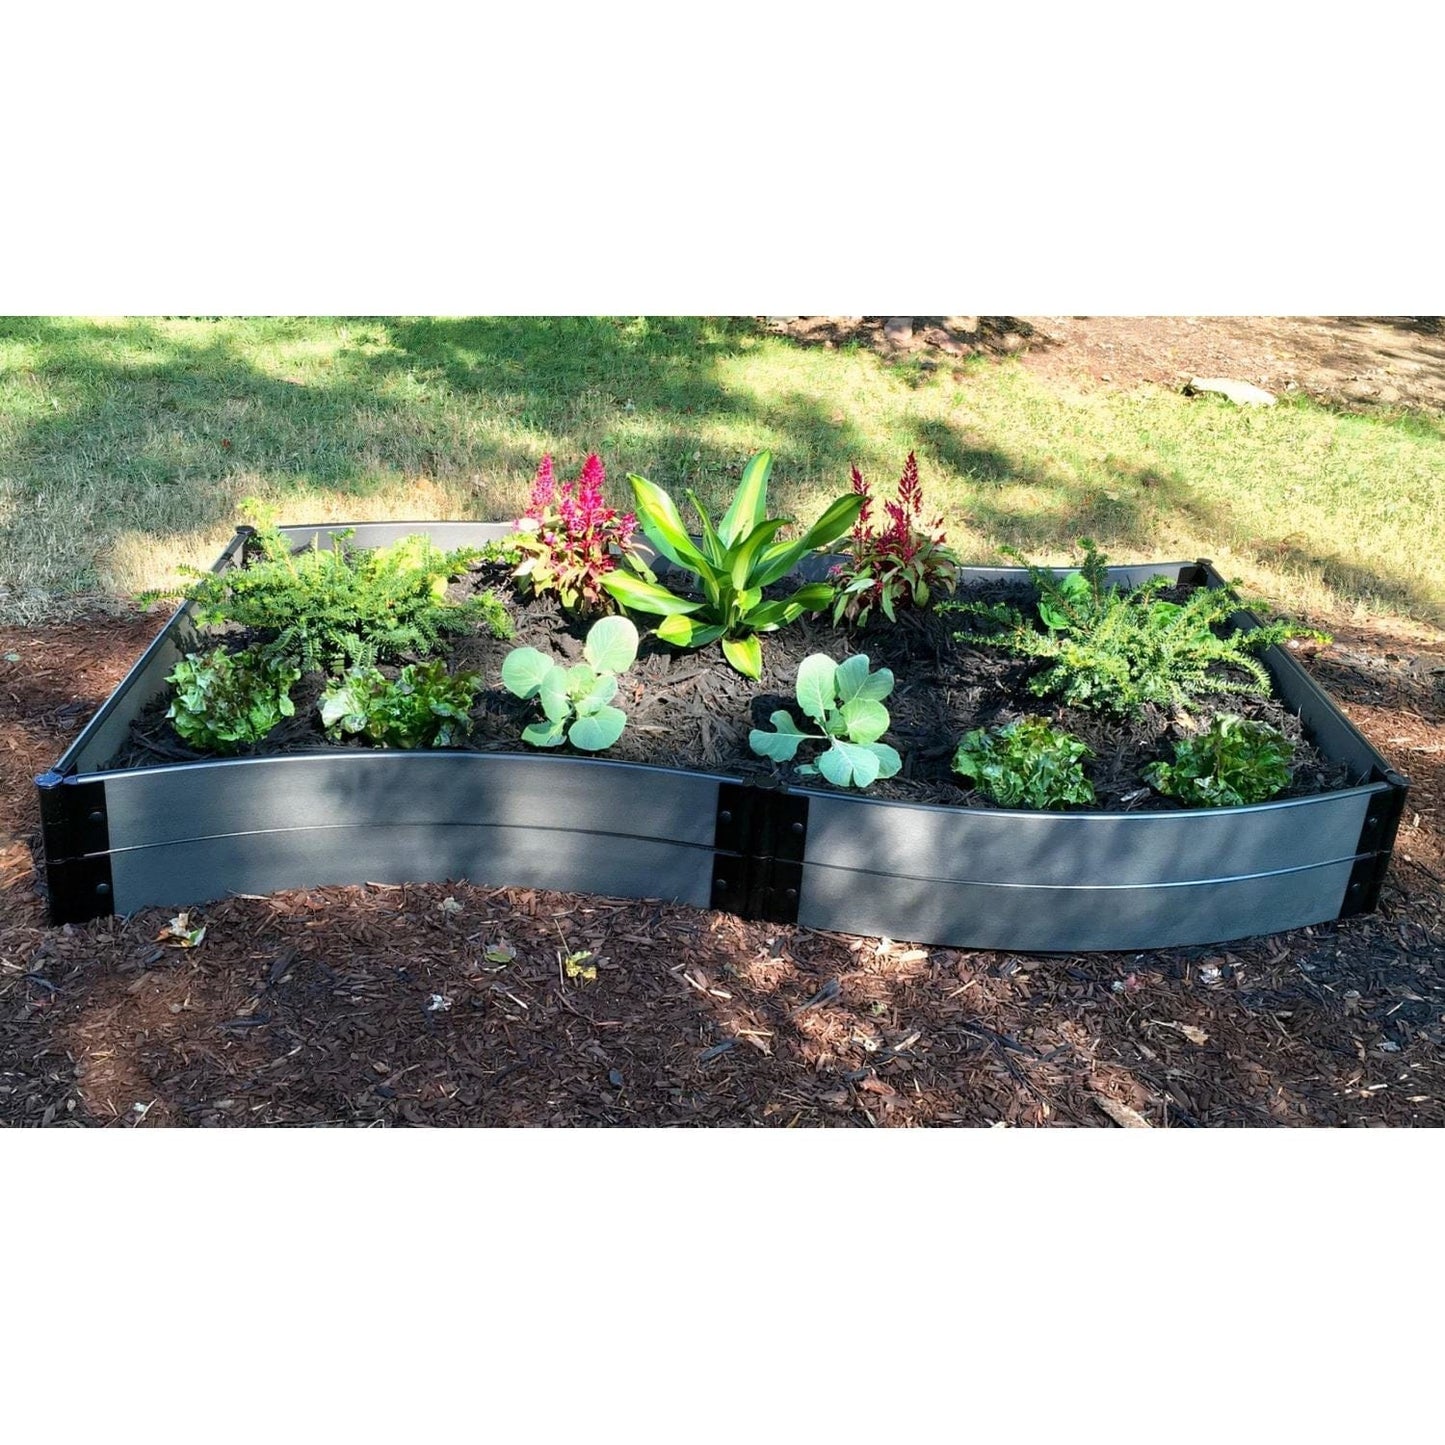 Frame It All Gardening Accessories Frame It All | Tool-Free Wavy Navy Raised Garden Bed 4' X 8' X 5.5" - Uptown Brown - 1" Profile 800001073